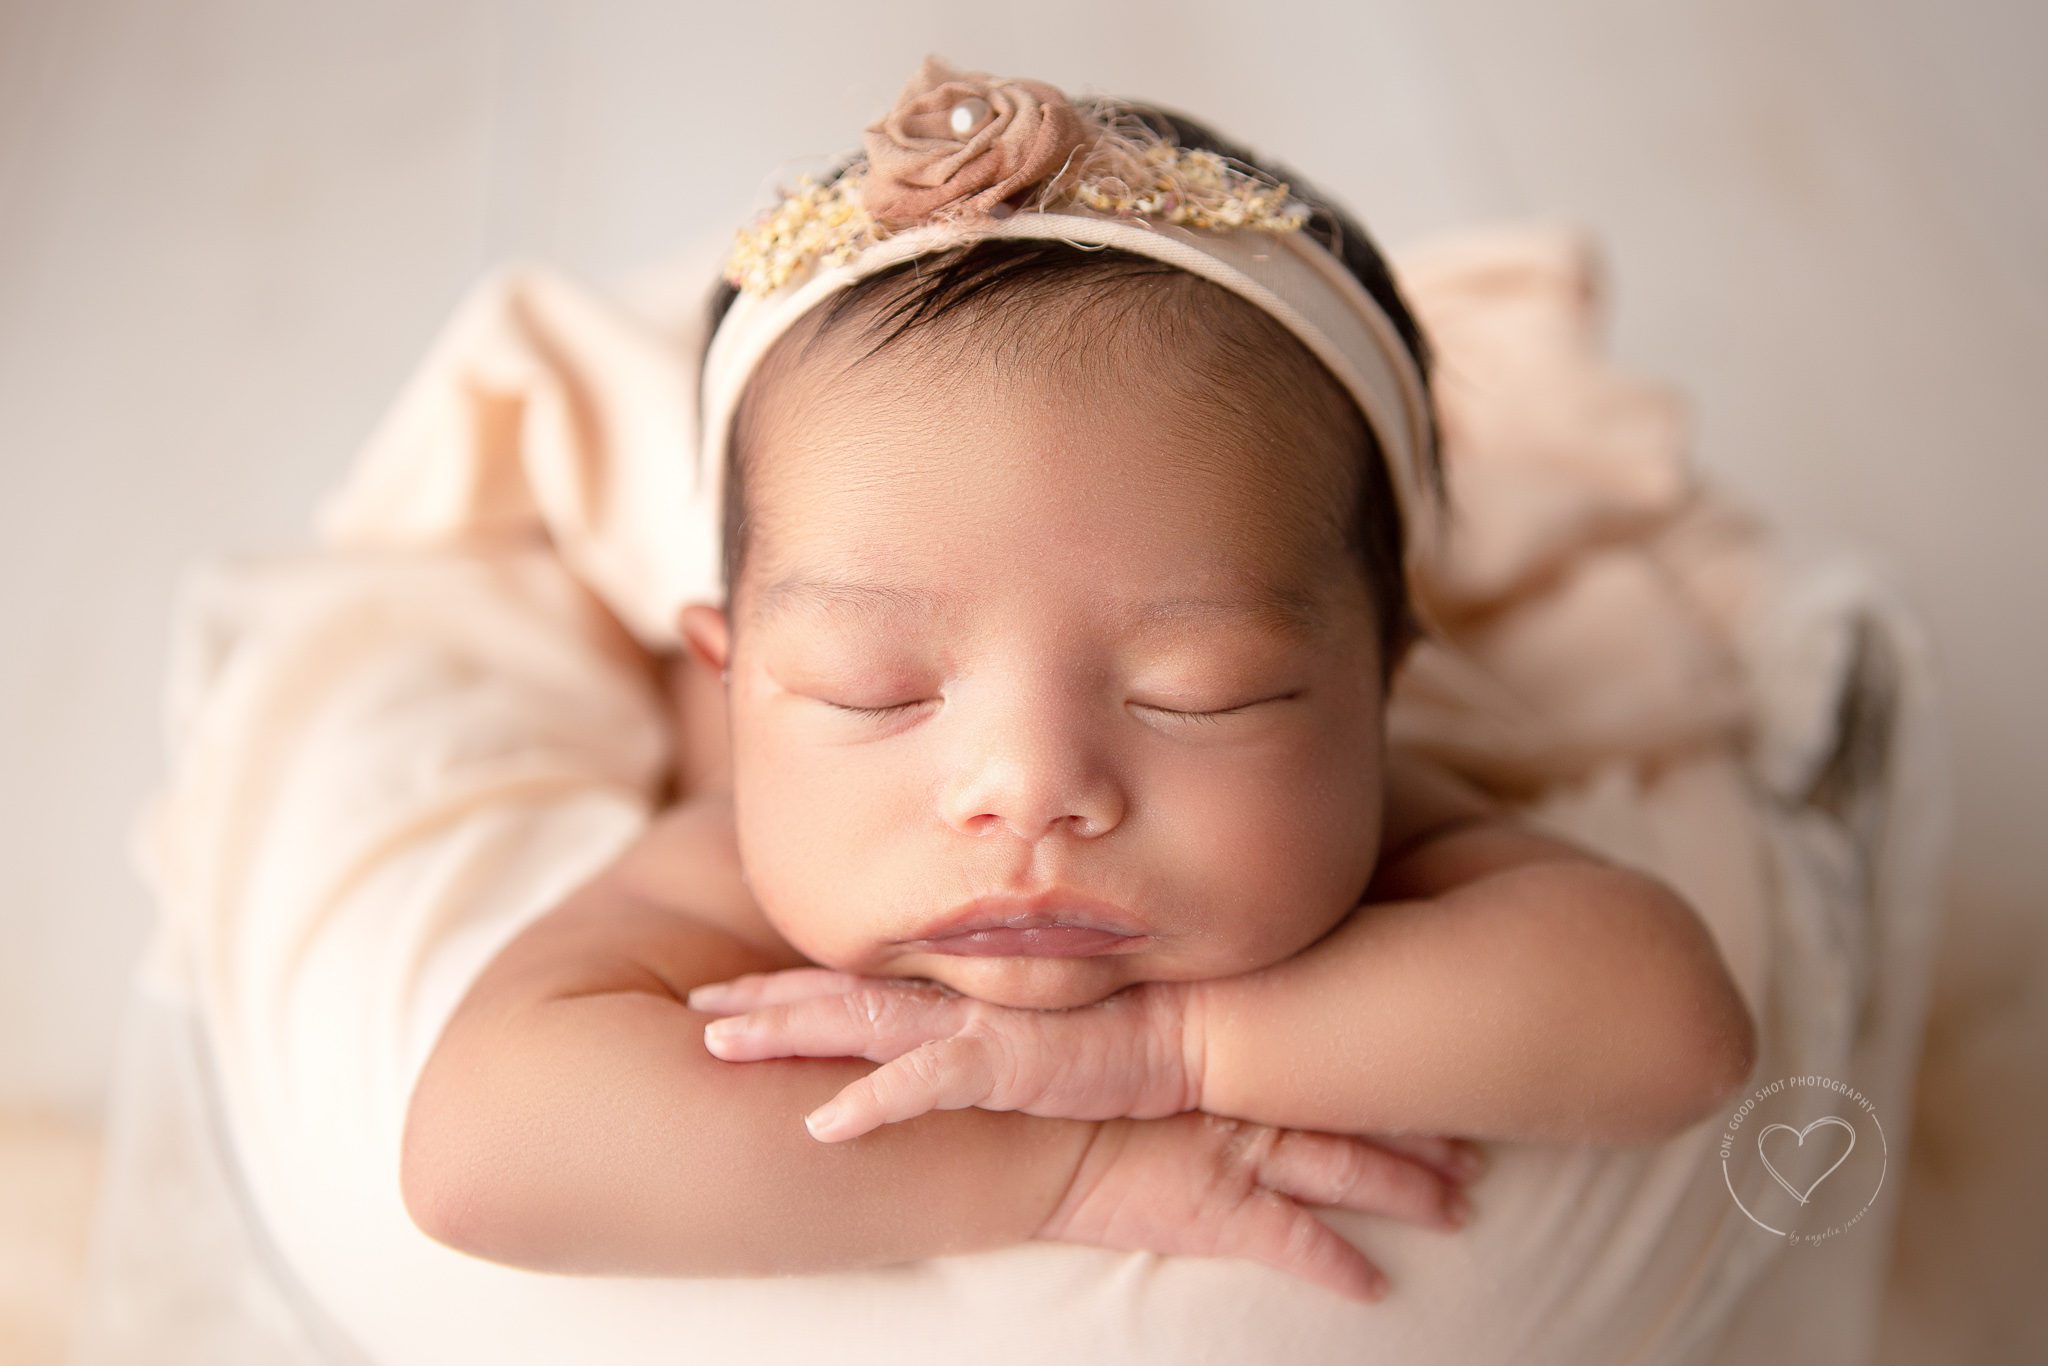 Newborn girl in a bucket, head on hands pose, peach and white, peachy floral headband